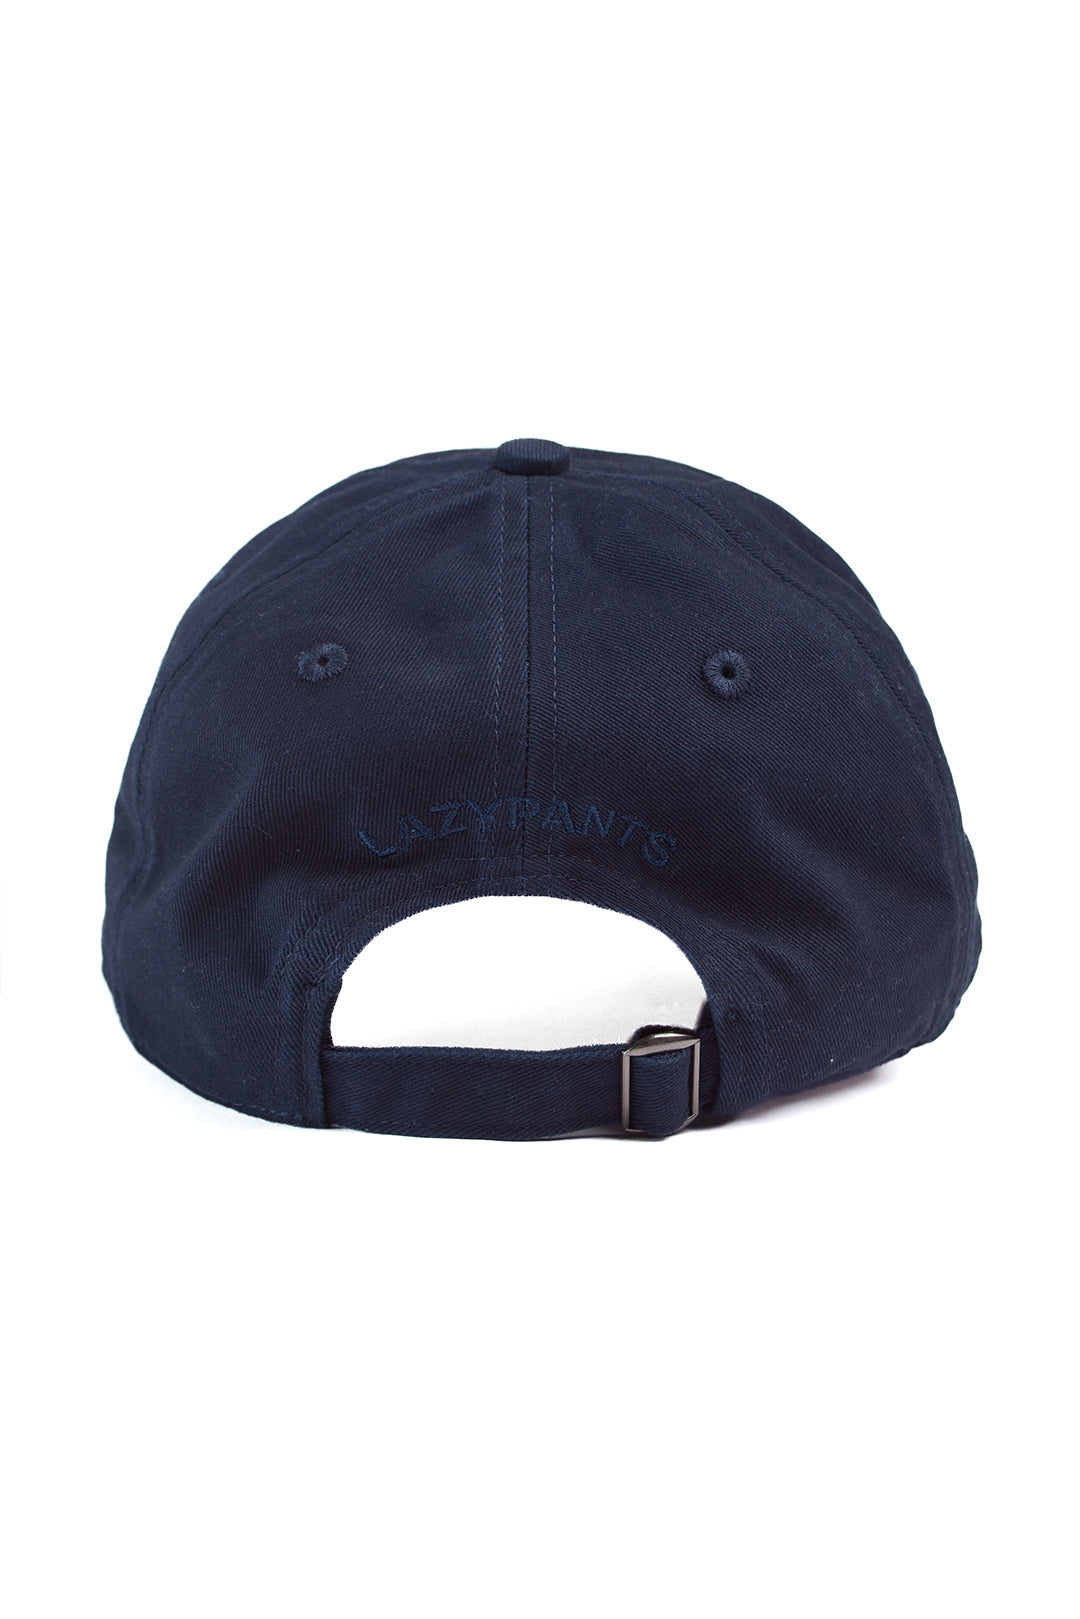 Washed cotton twill dad’s baseball cap in navy